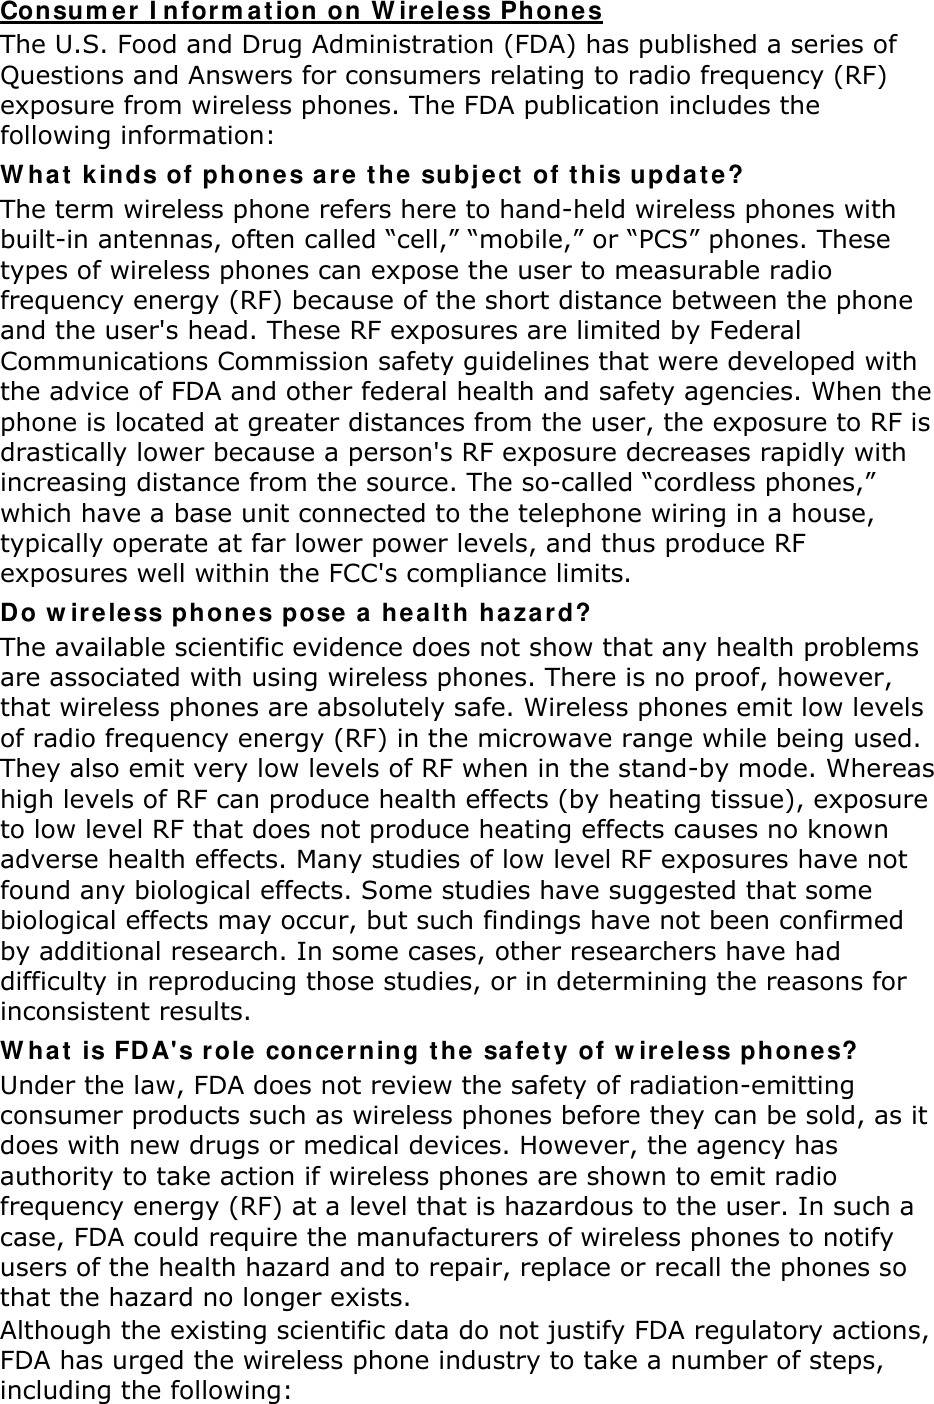 Con sum e r I nfor m ation on W ir ele ss Phones The U.S. Food and Drug Administration (FDA) has published a series of Questions and Answers for consumers relating to radio frequency (RF) exposure from wireless phones. The FDA publication includes the following information: W hat  k inds of ph ones a re t he  subj e ct  of t his upda te? The term wireless phone refers here to hand-held wireless phones with built-in antennas, often called “cell,” “mobile,” or “PCS” phones. These types of wireless phones can expose the user to measurable radio frequency energy (RF) because of the short distance between the phone and the user&apos;s head. These RF exposures are limited by Federal Communications Commission safety guidelines that were developed with the advice of FDA and other federal health and safety agencies. When the phone is located at greater distances from the user, the exposure to RF is drastically lower because a person&apos;s RF exposure decreases rapidly with increasing distance from the source. The so-called “cordless phones,” which have a base unit connected to the telephone wiring in a house, typically operate at far lower power levels, and thus produce RF exposures well within the FCC&apos;s compliance limits. Do w ireless phone s pose  a h ea lt h haza rd? The available scientific evidence does not show that any health problems are associated with using wireless phones. There is no proof, however, that wireless phones are absolutely safe. Wireless phones emit low levels of radio frequency energy (RF) in the microwave range while being used. They also emit very low levels of RF when in the stand-by mode. Whereas high levels of RF can produce health effects (by heating tissue), exposure to low level RF that does not produce heating effects causes no known adverse health effects. Many studies of low level RF exposures have not found any biological effects. Some studies have suggested that some biological effects may occur, but such findings have not been confirmed by additional research. In some cases, other researchers have had difficulty in reproducing those studies, or in determining the reasons for inconsistent results. W hat  is FD A&apos;s r ole con cer ning t he  sa fet y of w ire less phone s? Under the law, FDA does not review the safety of radiation-emitting consumer products such as wireless phones before they can be sold, as it does with new drugs or medical devices. However, the agency has authority to take action if wireless phones are shown to emit radio frequency energy (RF) at a level that is hazardous to the user. In such a case, FDA could require the manufacturers of wireless phones to notify users of the health hazard and to repair, replace or recall the phones so that the hazard no longer exists. Although the existing scientific data do not justify FDA regulatory actions, FDA has urged the wireless phone industry to take a number of steps, including the following: 